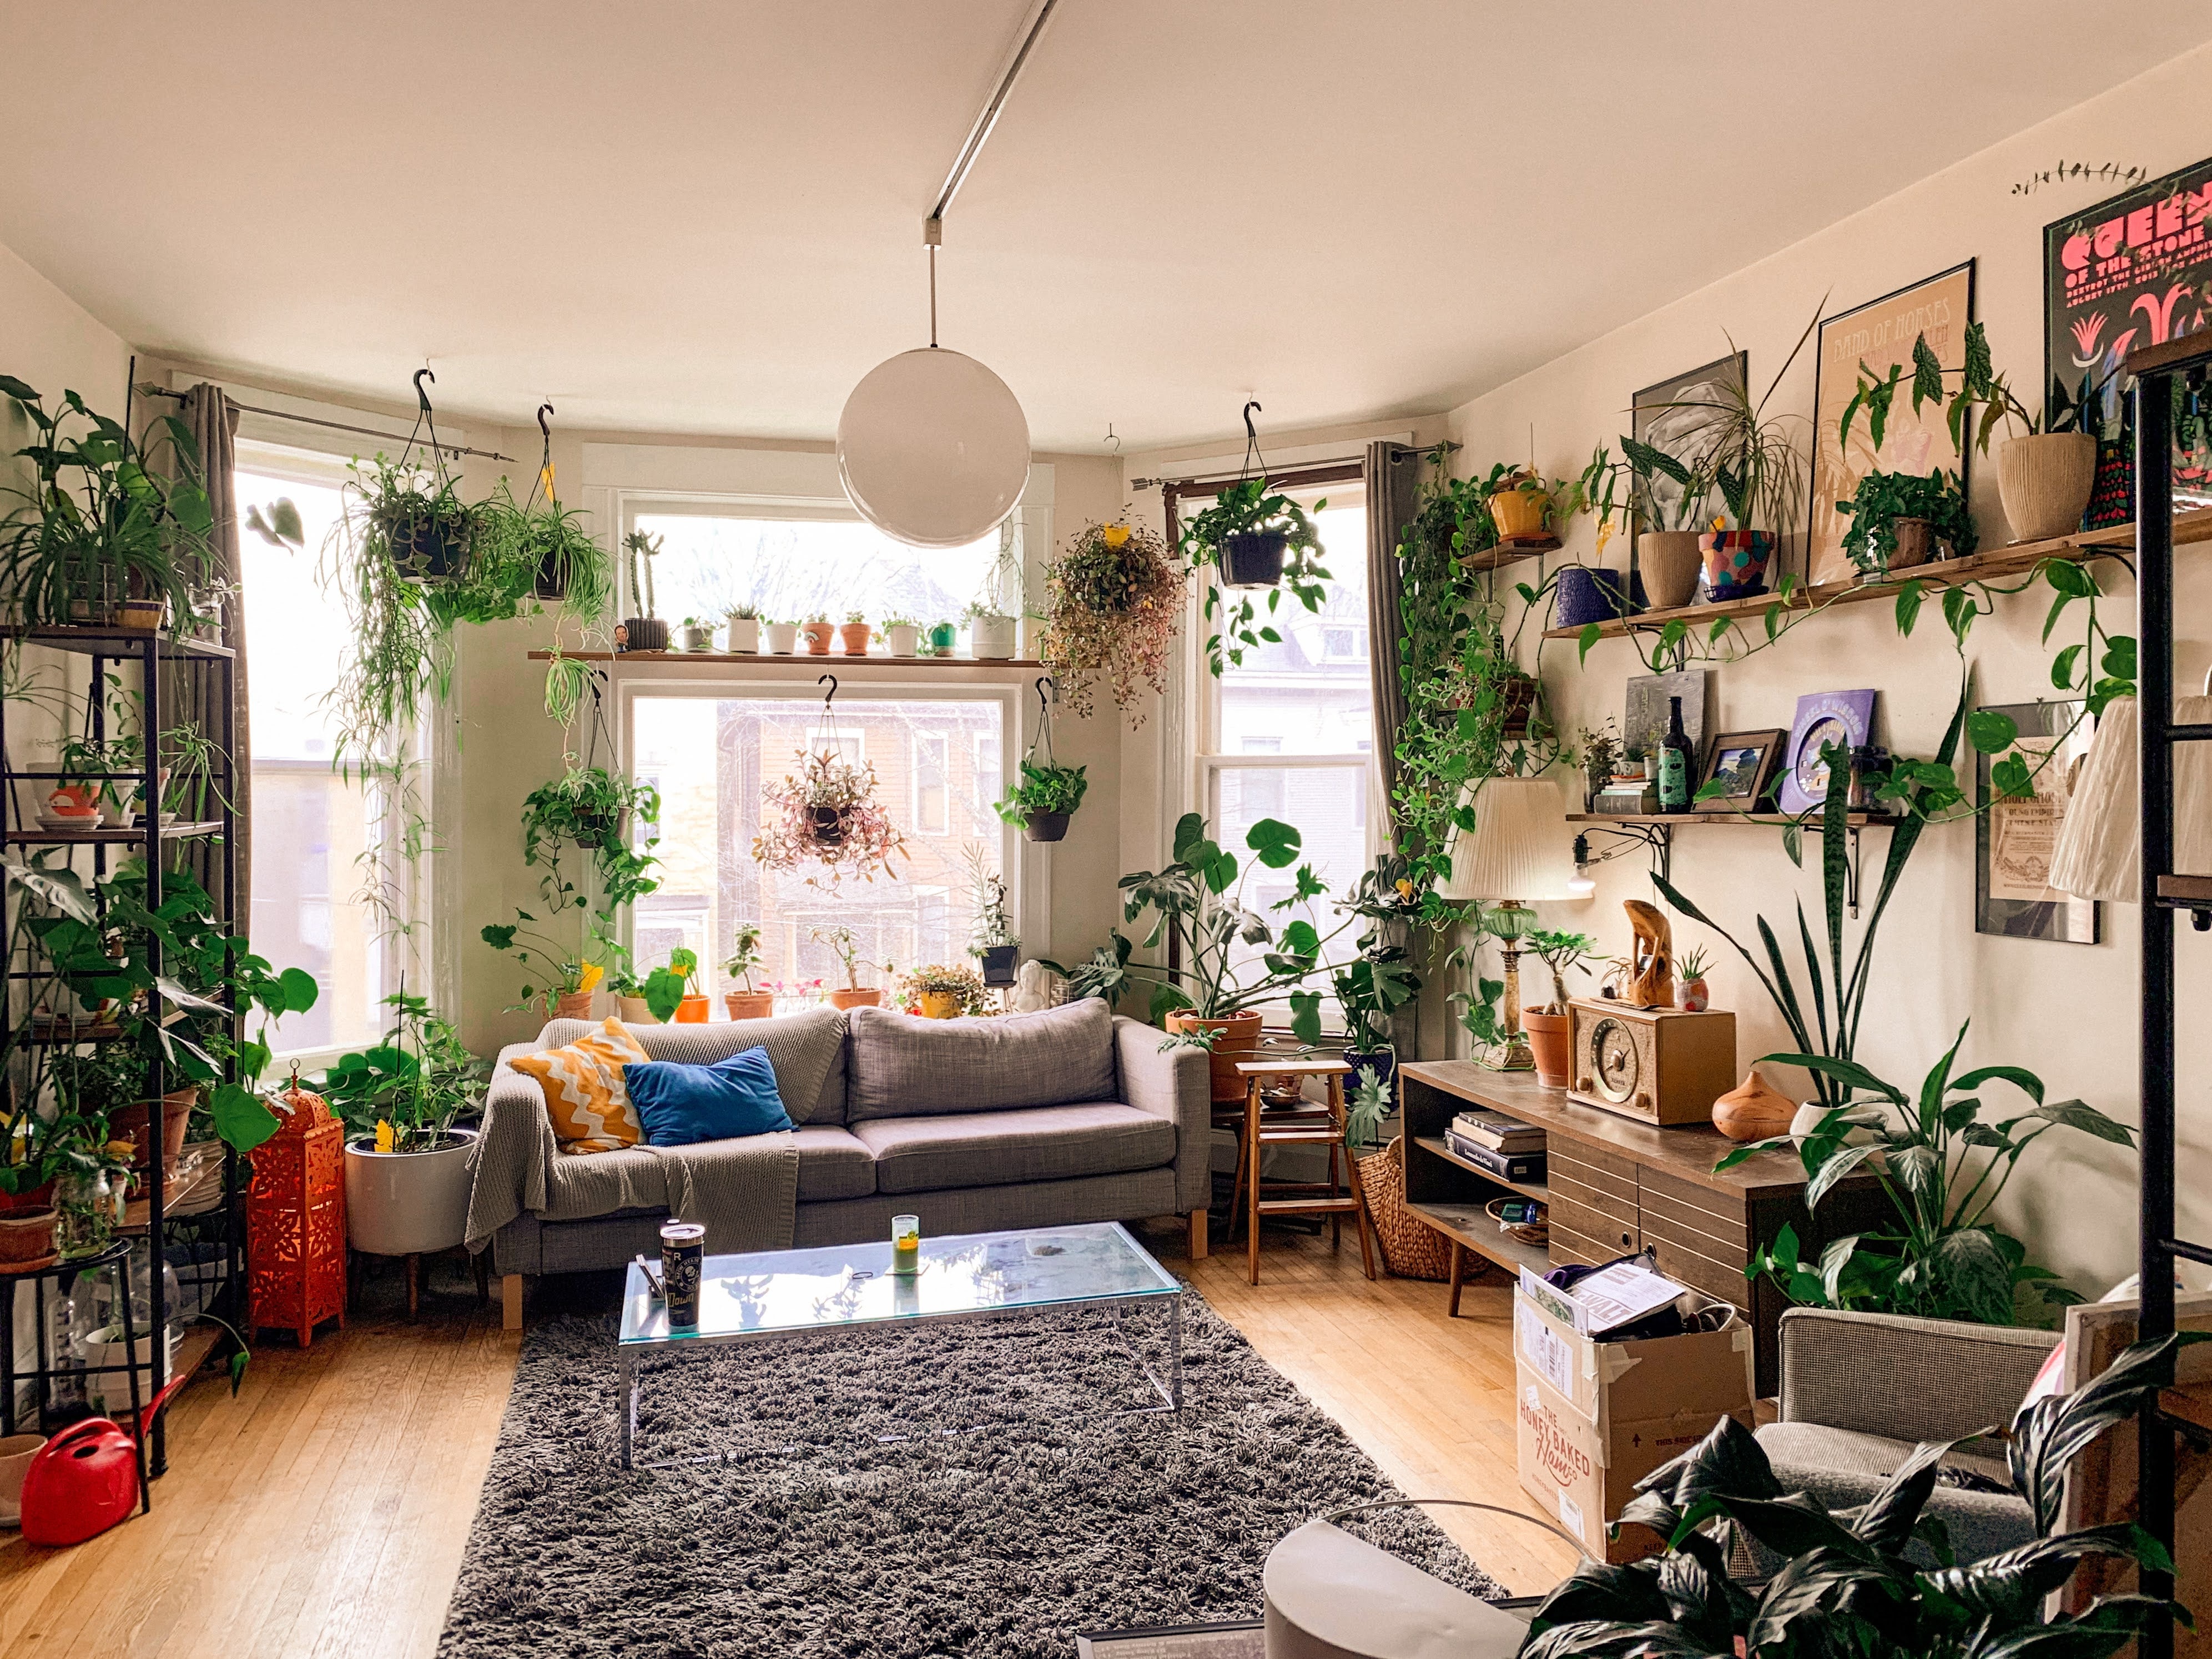 artificial plants soften hard edges in your living room